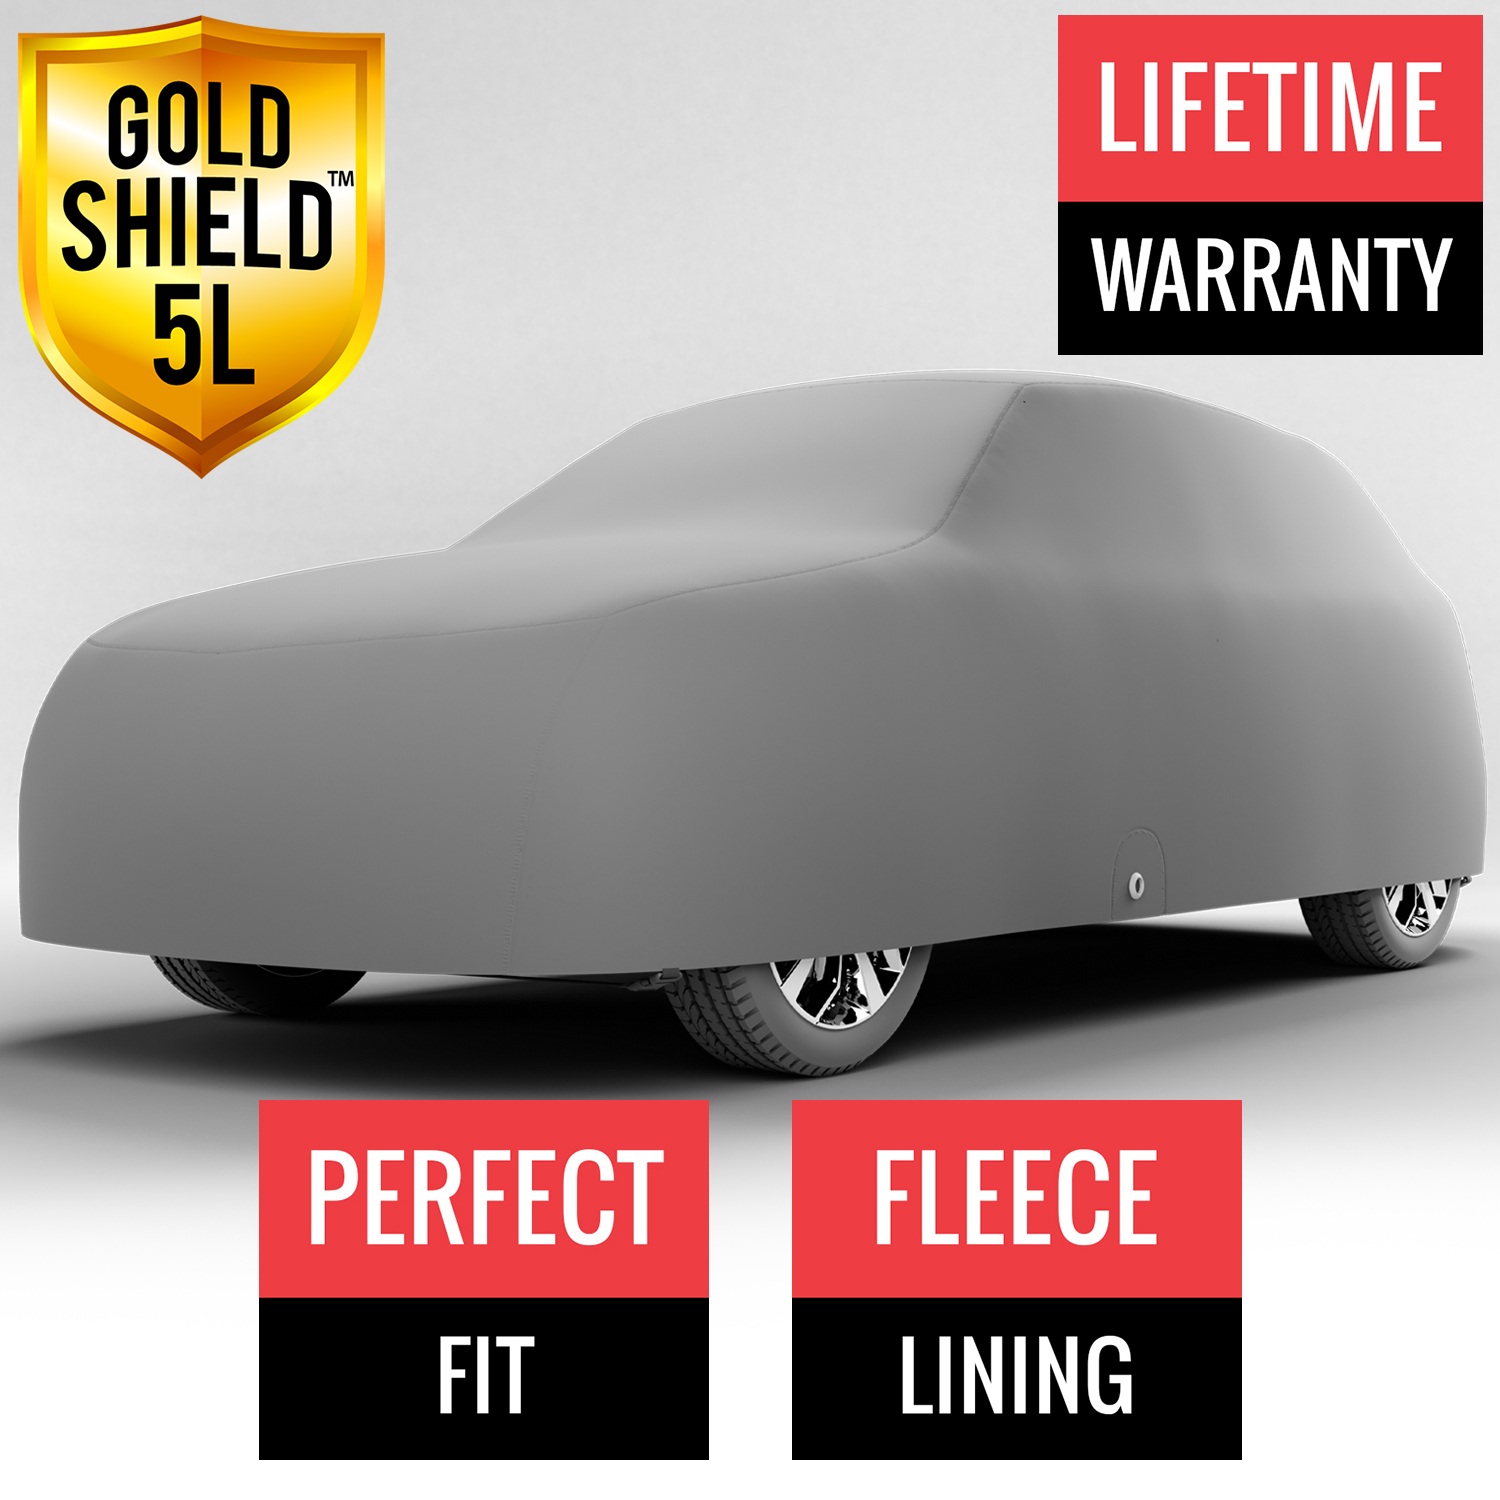 Gold Shield 5L - Car Cover for Plymouth Voyager 1990 Van